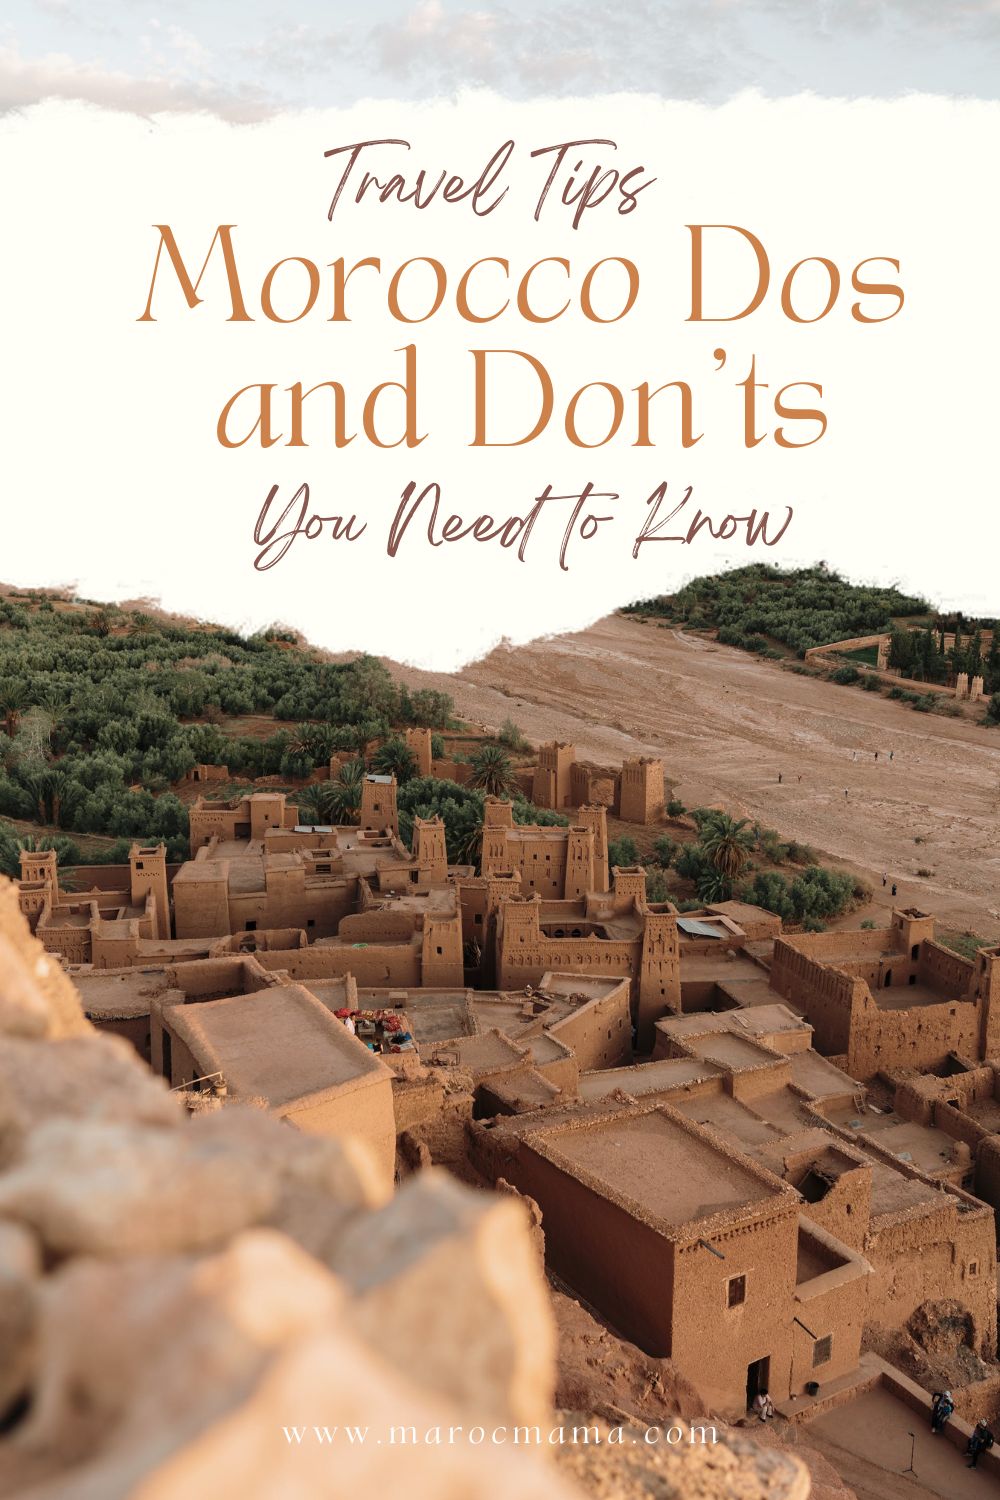 Brown Concrete Buildings at Drâa-Tafilalet, Fas with the text Morocco Dos and Don'ts: Travel Tips You Need to Know